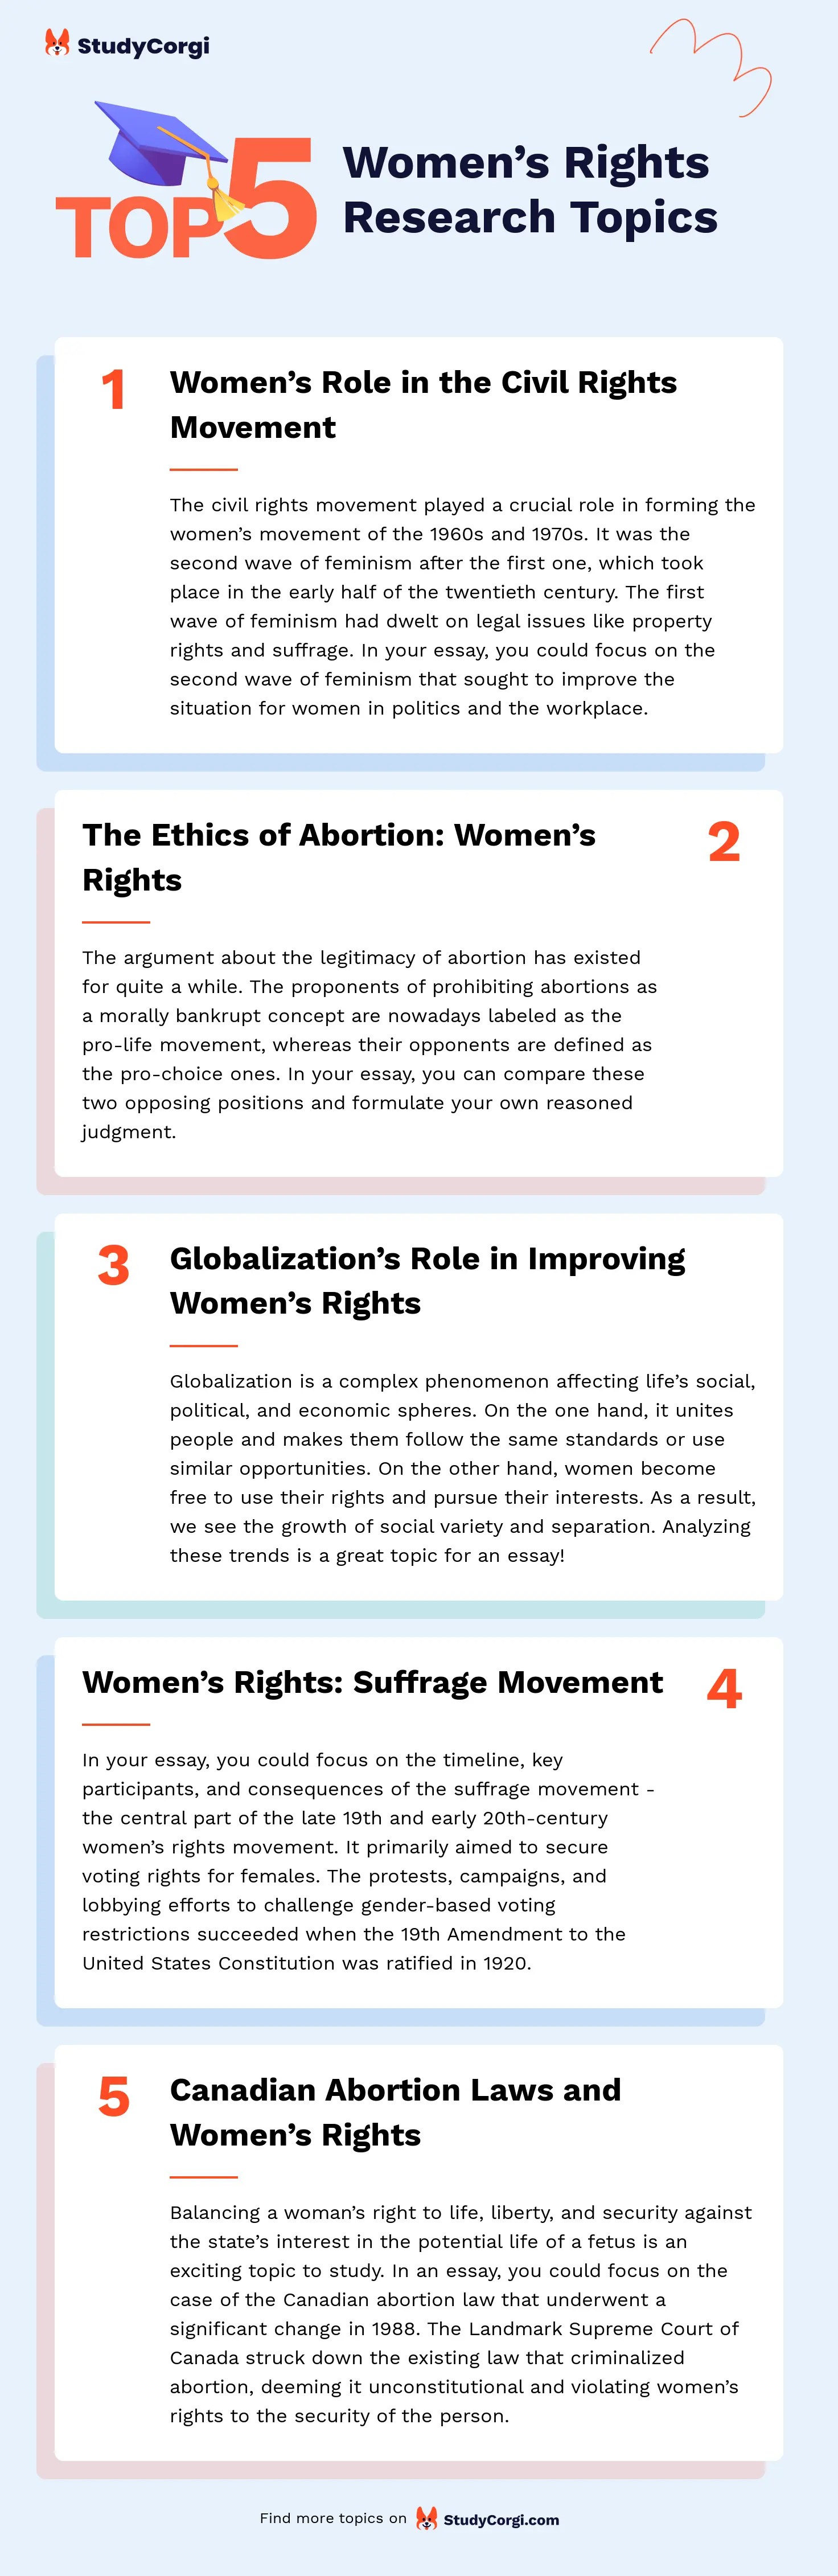 TOP-5 Women’s Rights Research Topics